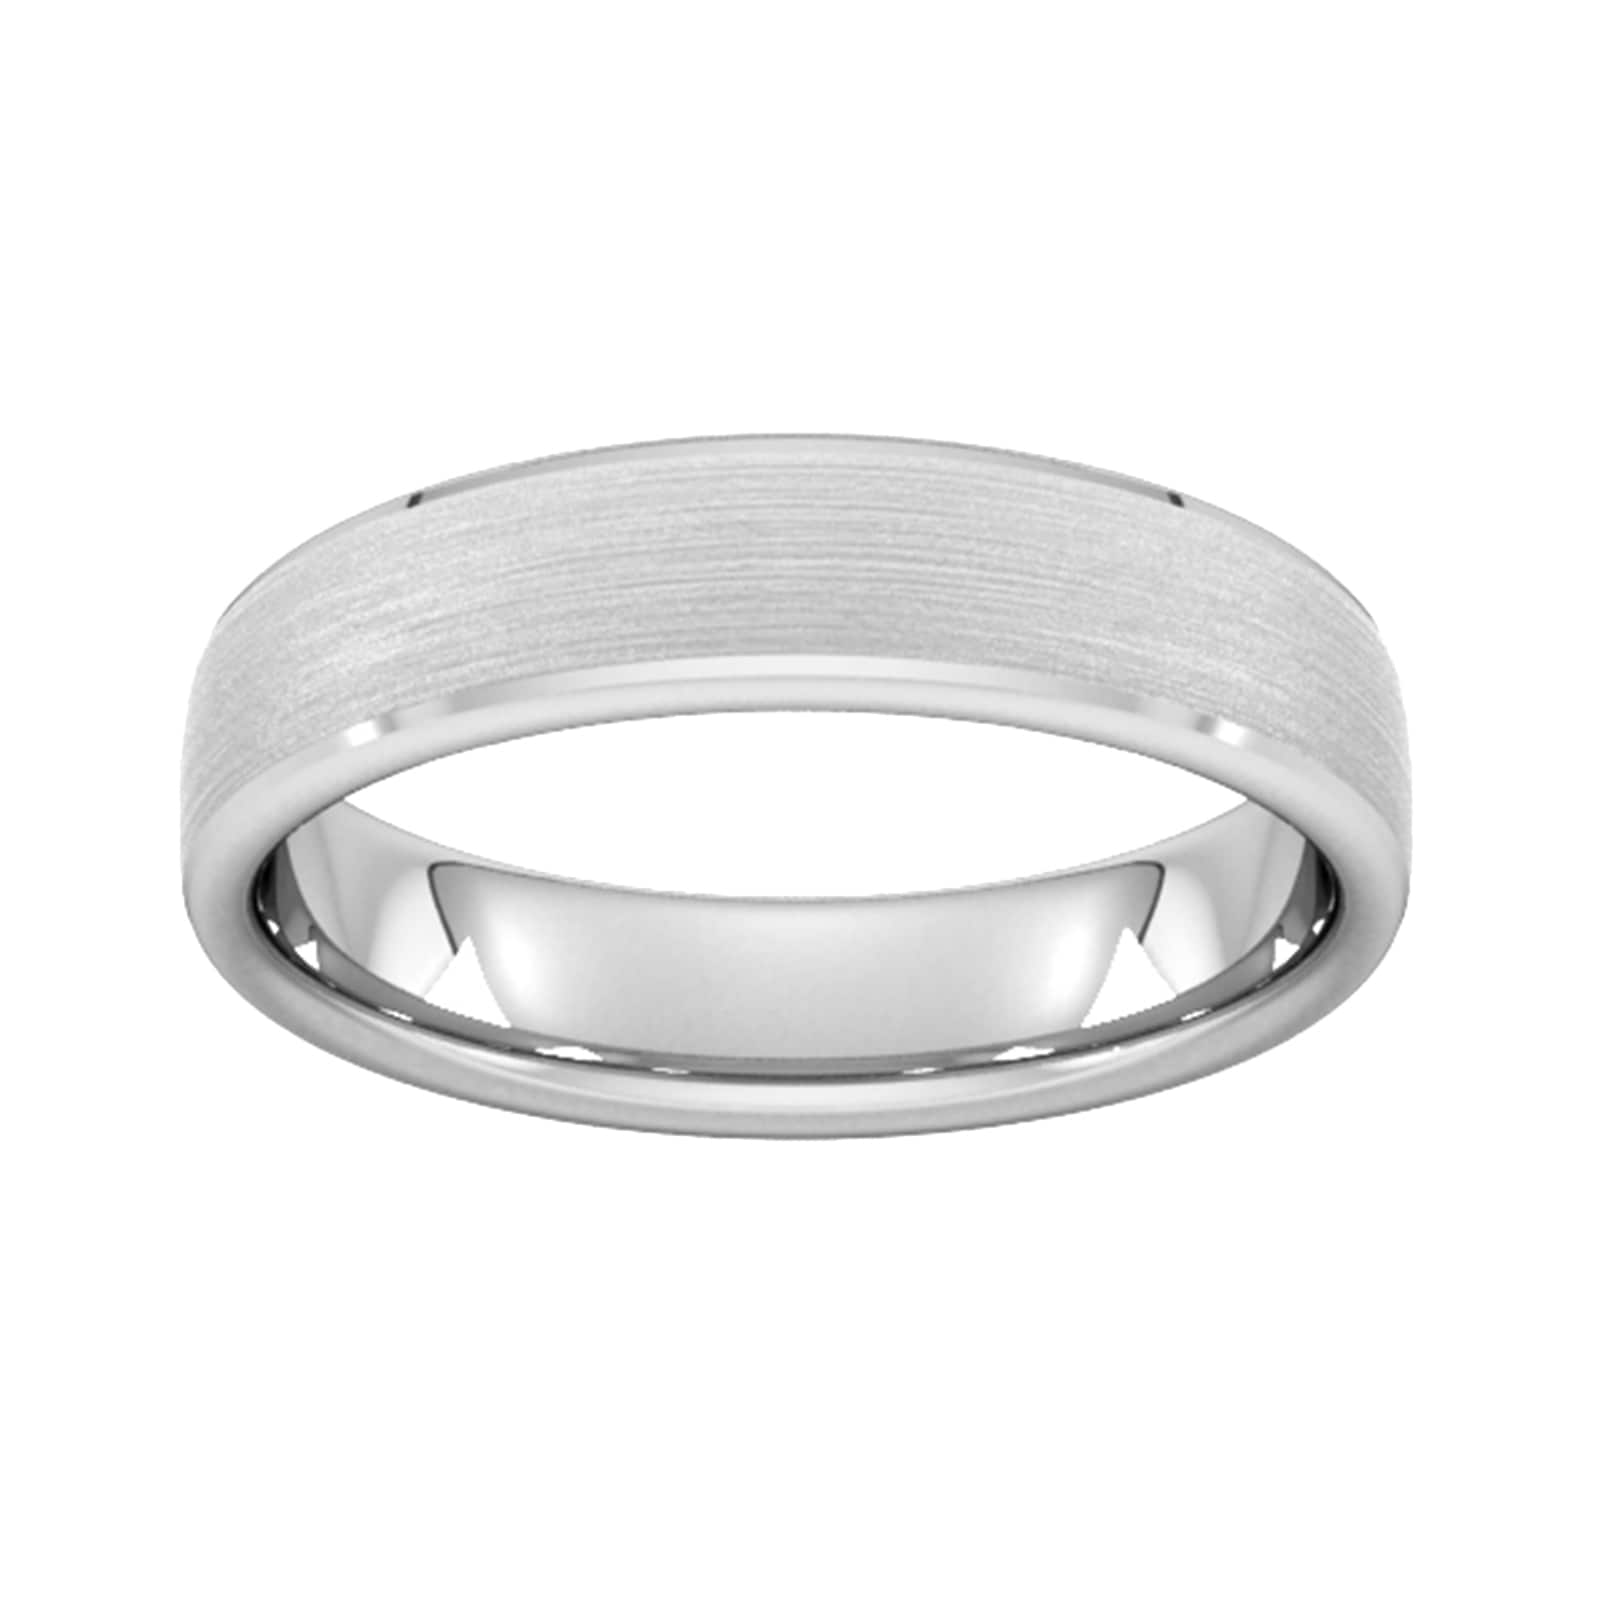 5mm Traditional Court Heavy Polished Chamfered Edges With Matt Centre Wedding Ring In 18 Carat White Gold - Ring Size W